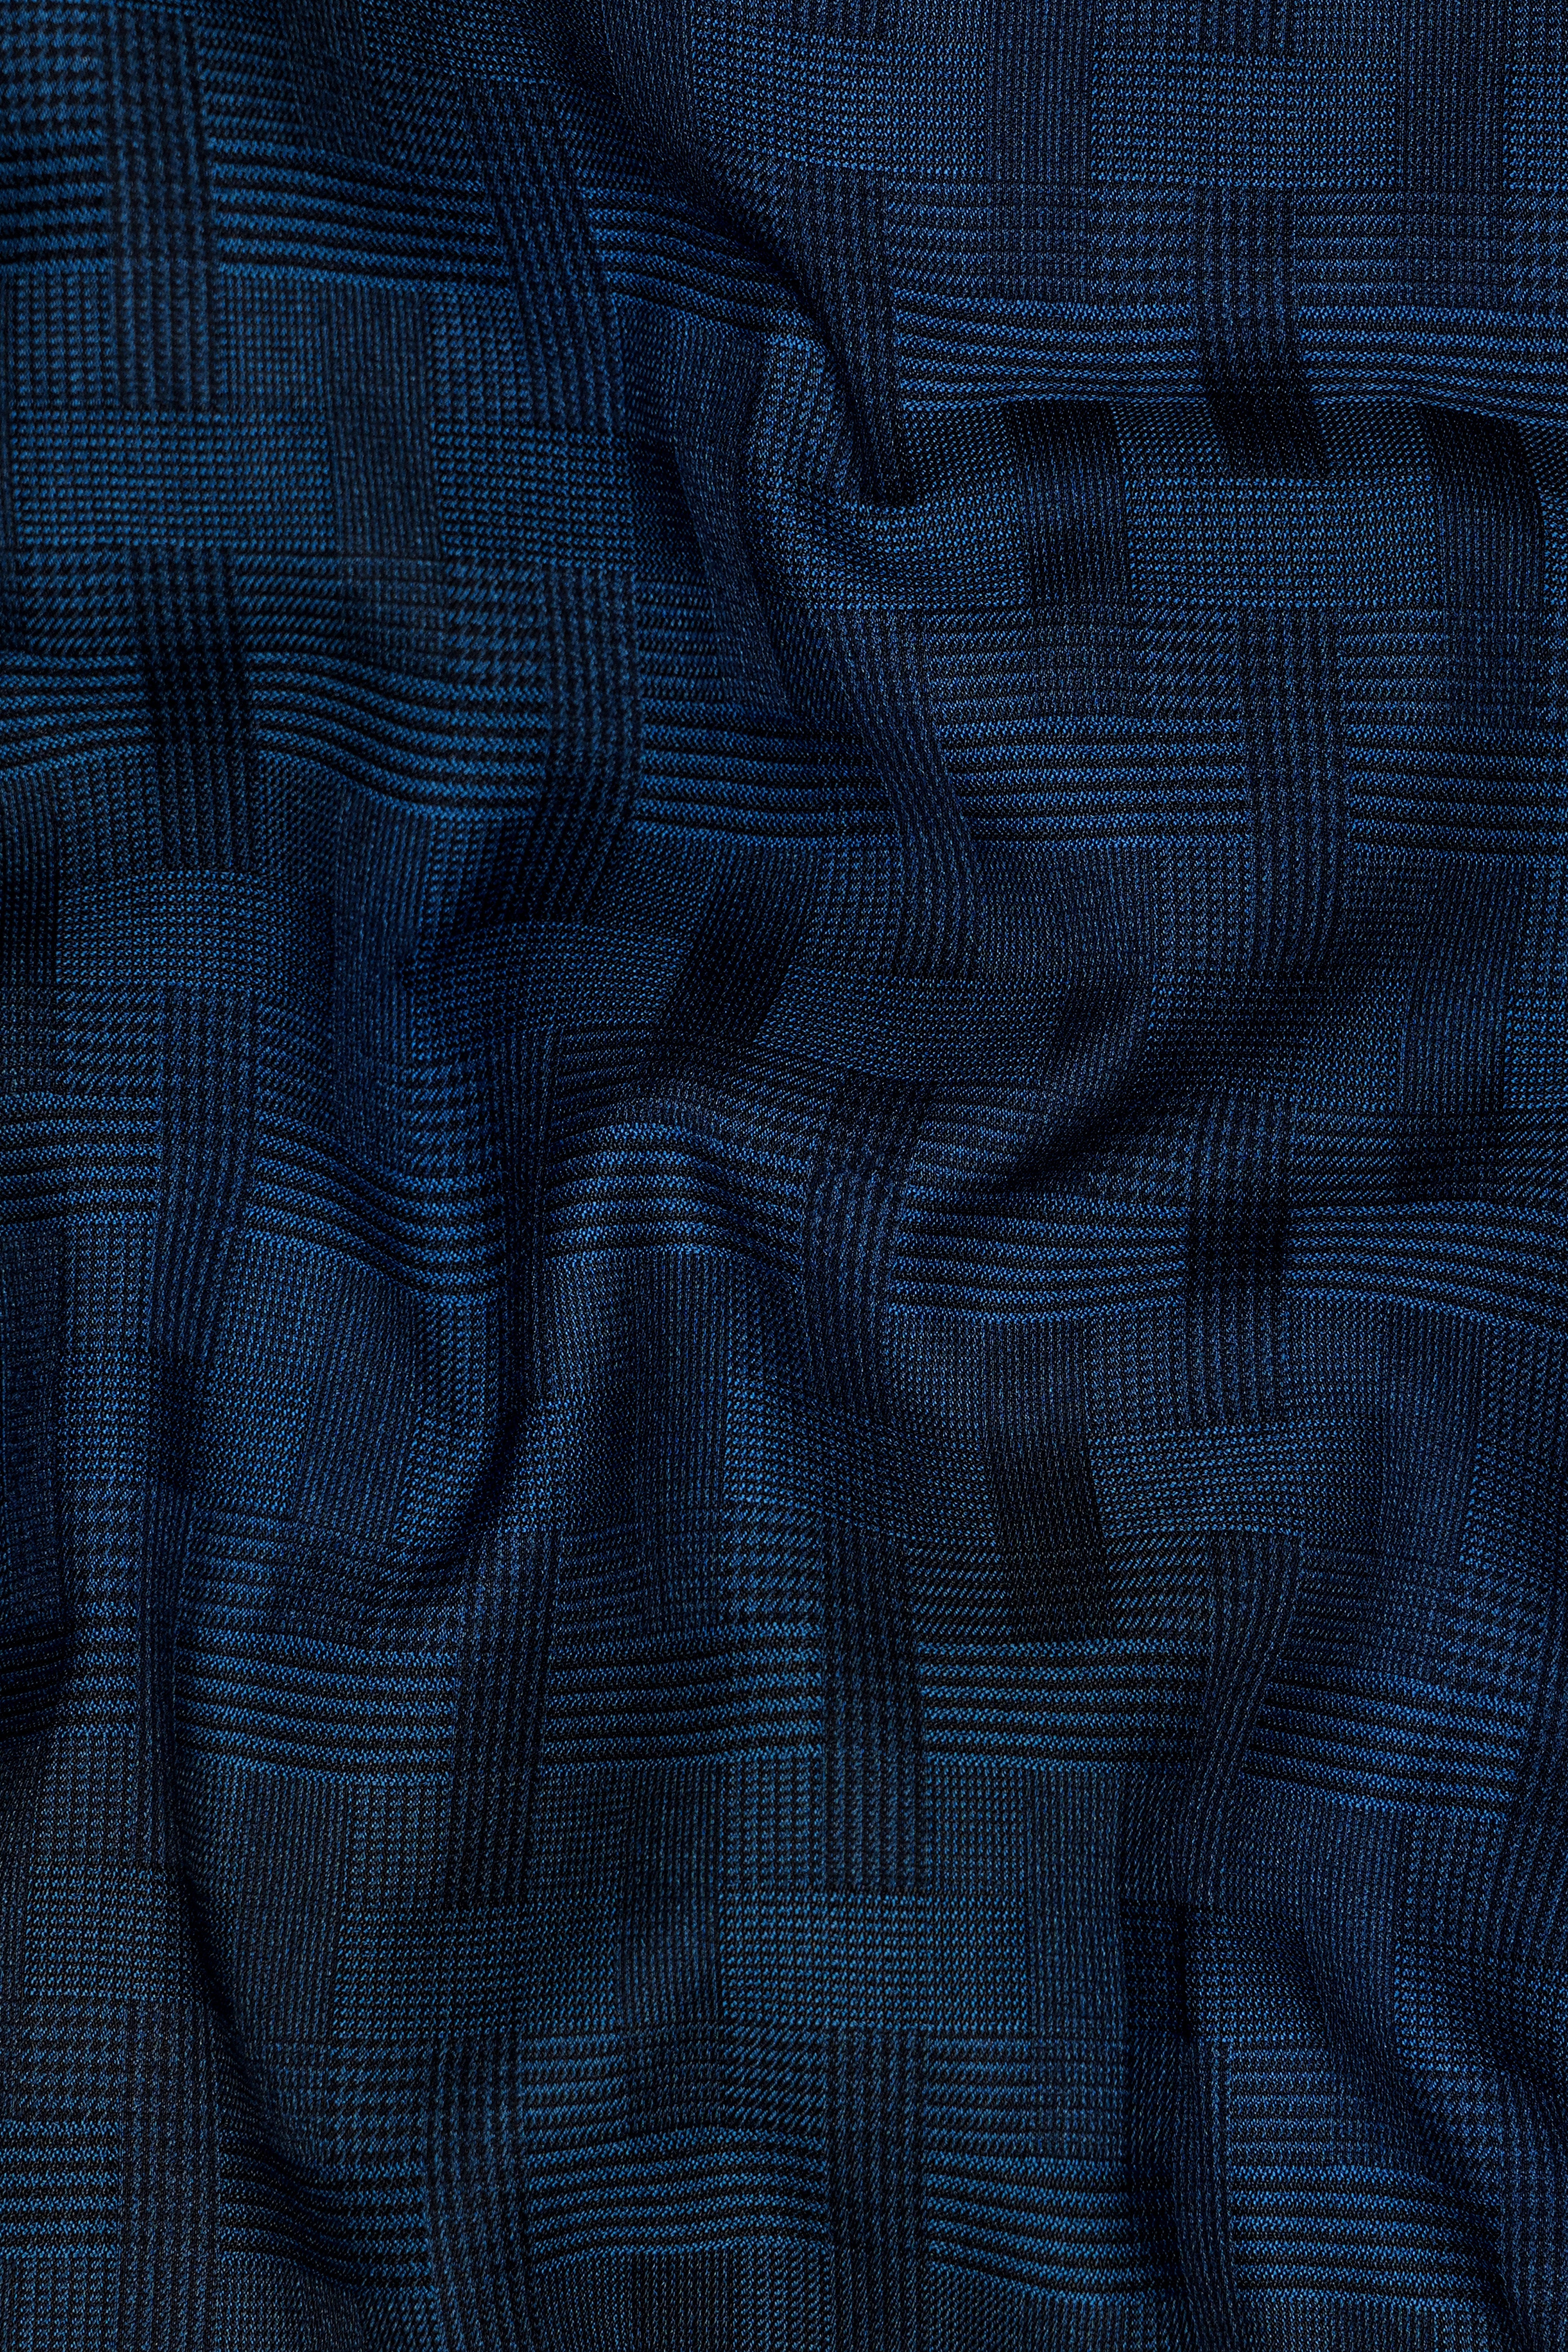 Midnight Blue with Nile Blue Jacquard Textured Pant T2910-SW-28, T2910-SW-30, T2910-SW-32, T2910-SW-34, T2910-SW-36, T2910-SW-38, T2910-SW-40, T2910-SW-42, T2910-SW-44